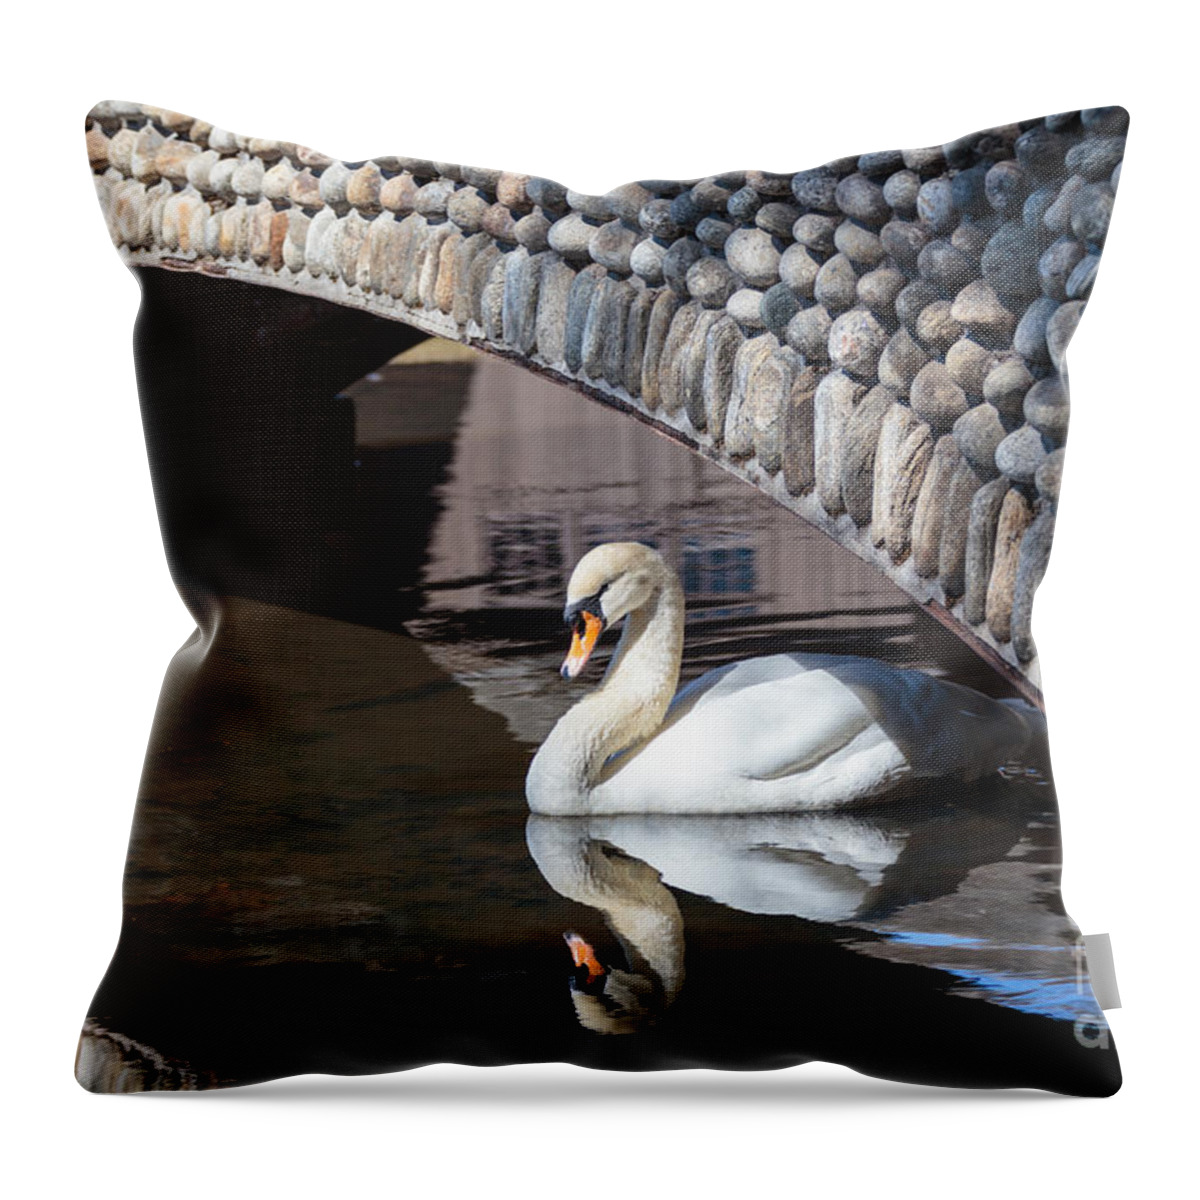 Stone Arch Bridge Throw Pillow featuring the photograph Underneath the Arch by Mary Lou Chmura